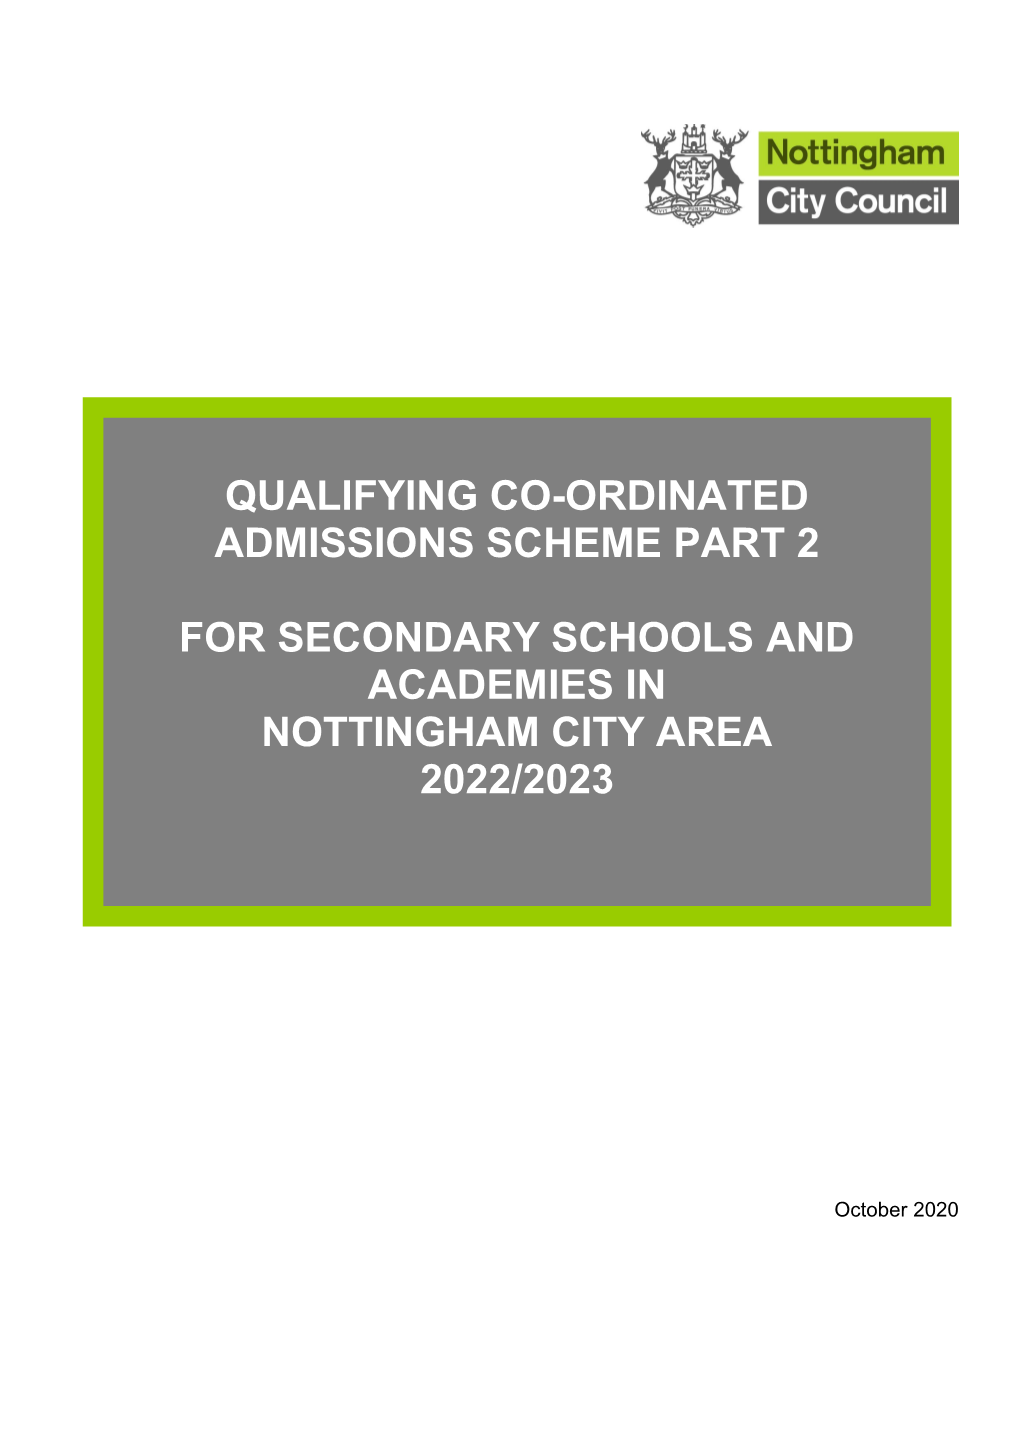 Qualifying Co-Ordinated Admissions Scheme Part 2 for Secondary Schools and Academies in Nottingham City Area 2022/2023